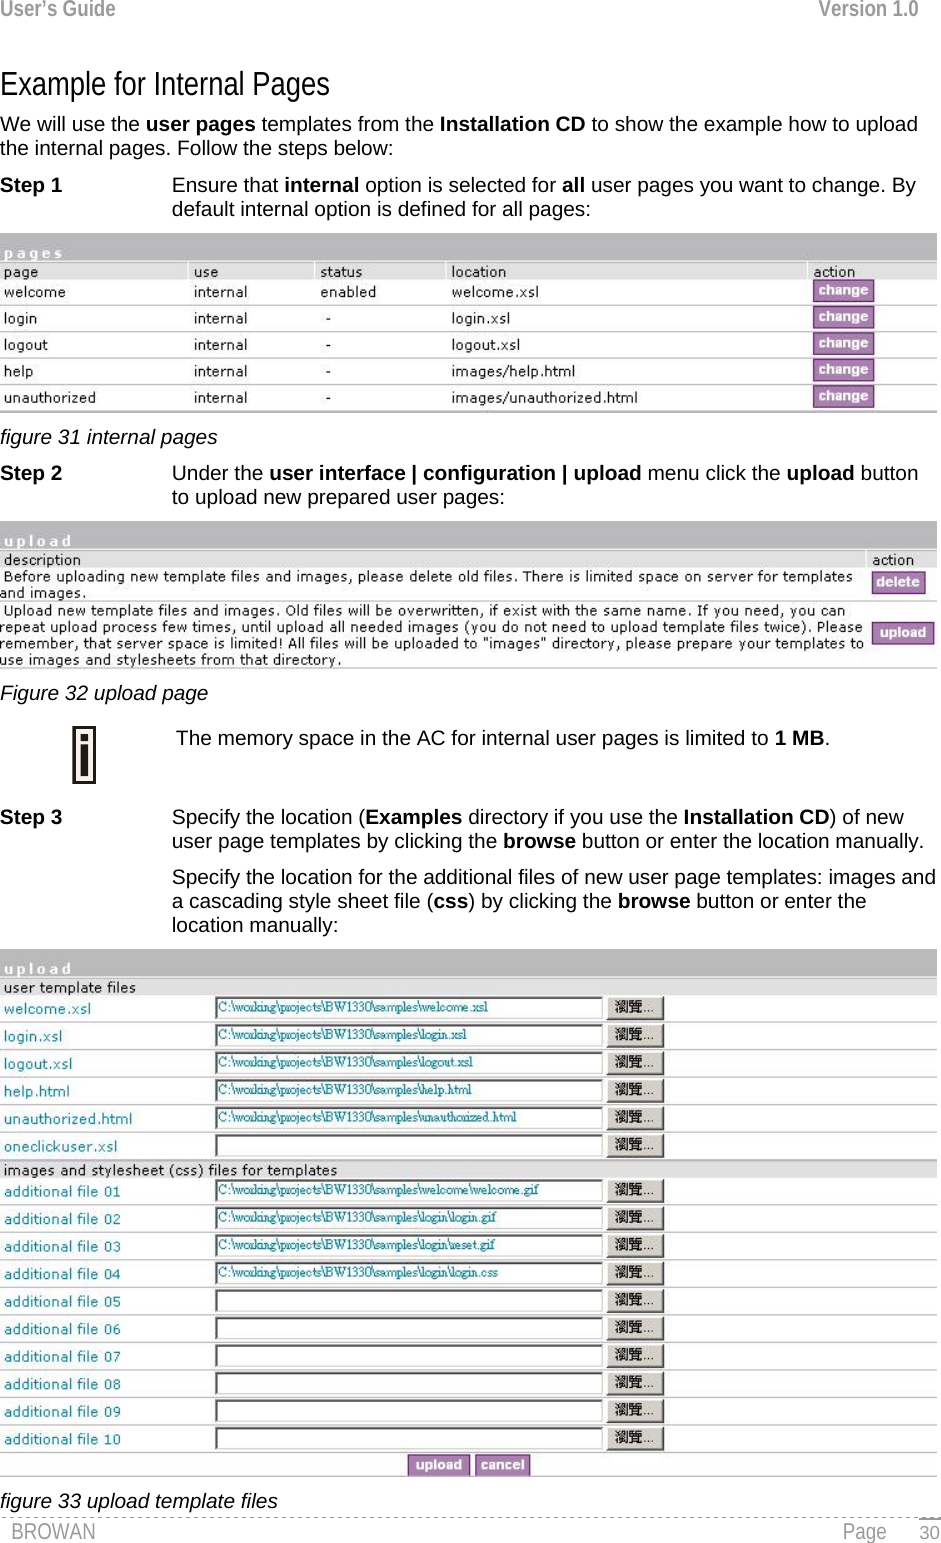 User’s Guide  Version 1.0  Example for Internal Pages  We will use the user pages templates from the Installation CD to show the example how to upload the internal pages. Follow the steps below: Step 1 Ensure that internal option is selected for all user pages you want to change. By default internal option is defined for all pages:  figure 31 internal pages Step 2  Under the user interface | configuration | upload menu click the upload button to upload new prepared user pages:  Figure 32 upload page The memory space in the AC for internal user pages is limited to 1 MB.  Step 3  Specify the location (Examples directory if you use the Installation CD) of new user page templates by clicking the browse button or enter the location manually.  Specify the location for the additional files of new user page templates: images and a cascading style sheet file (css) by clicking the browse button or enter the location manually:  BROWAN                                                                                                                                               Page figure 33 upload template files   30